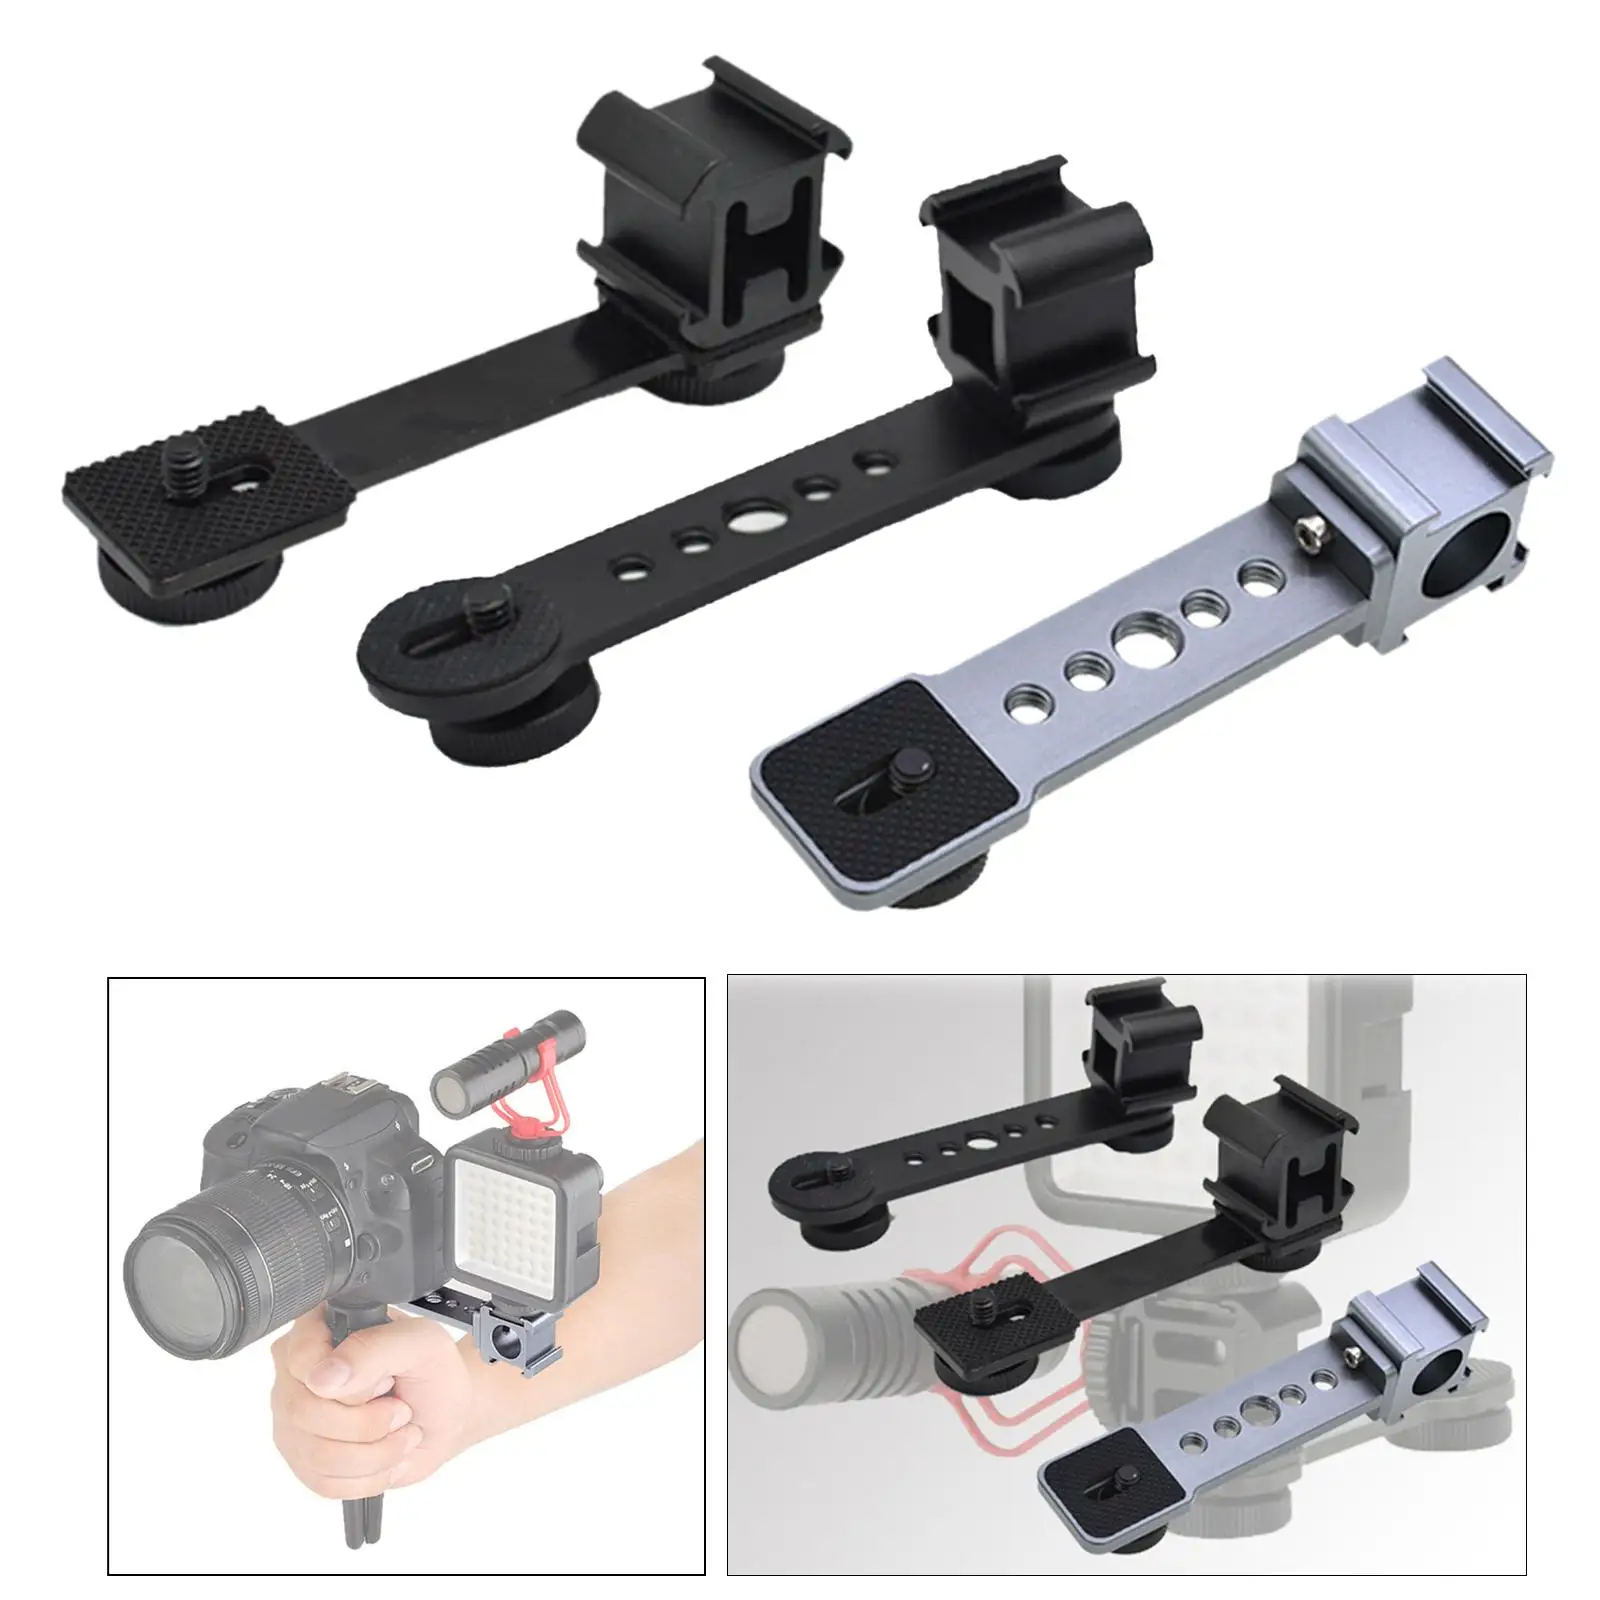 Triple Cold Shoe Mount Microphone Bar Bracket for Smooth 4